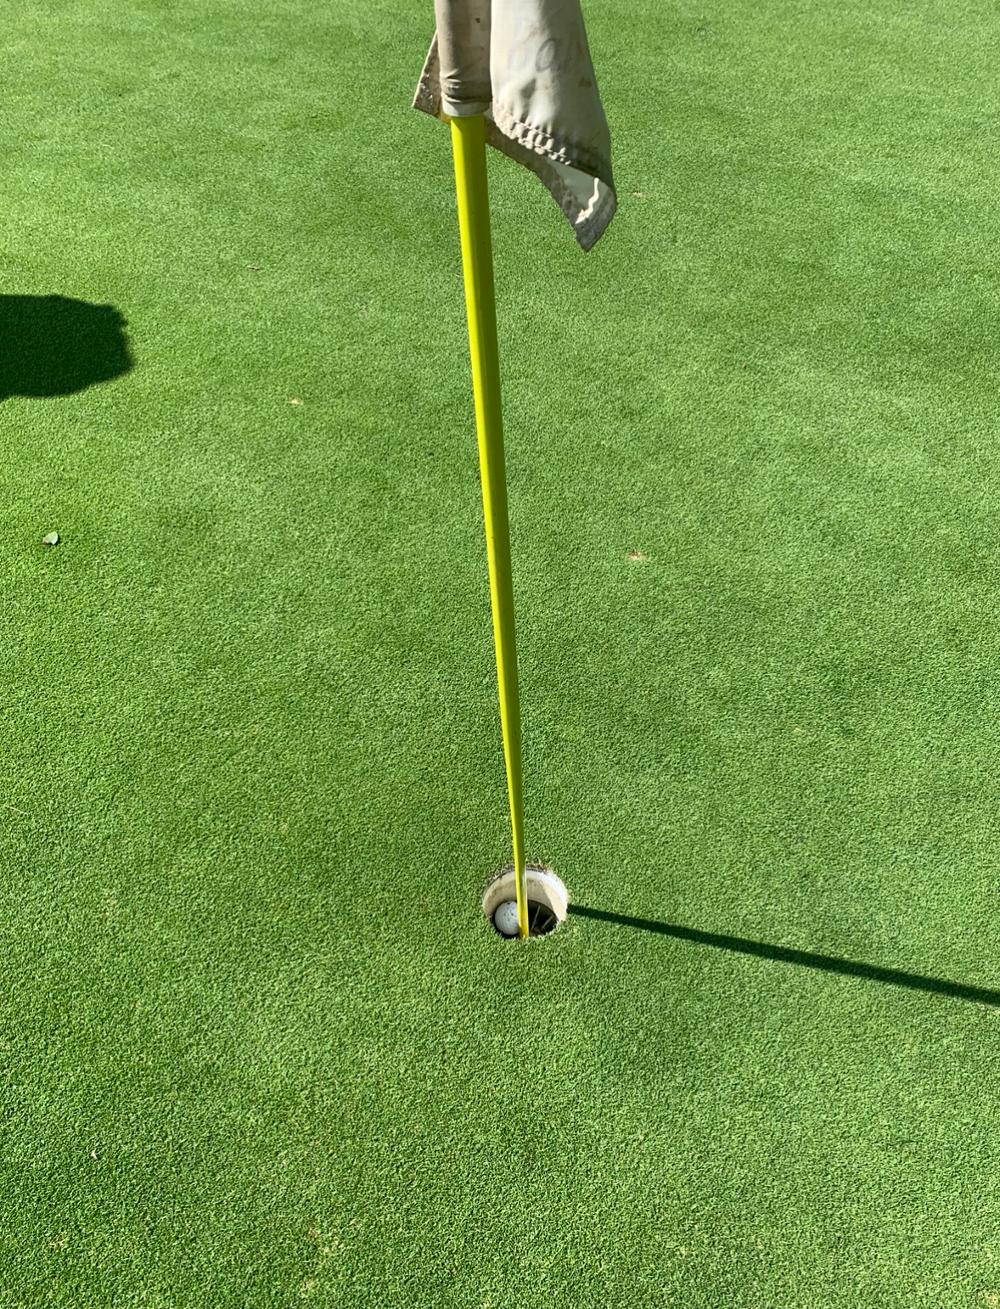 Hole 16 hole in one